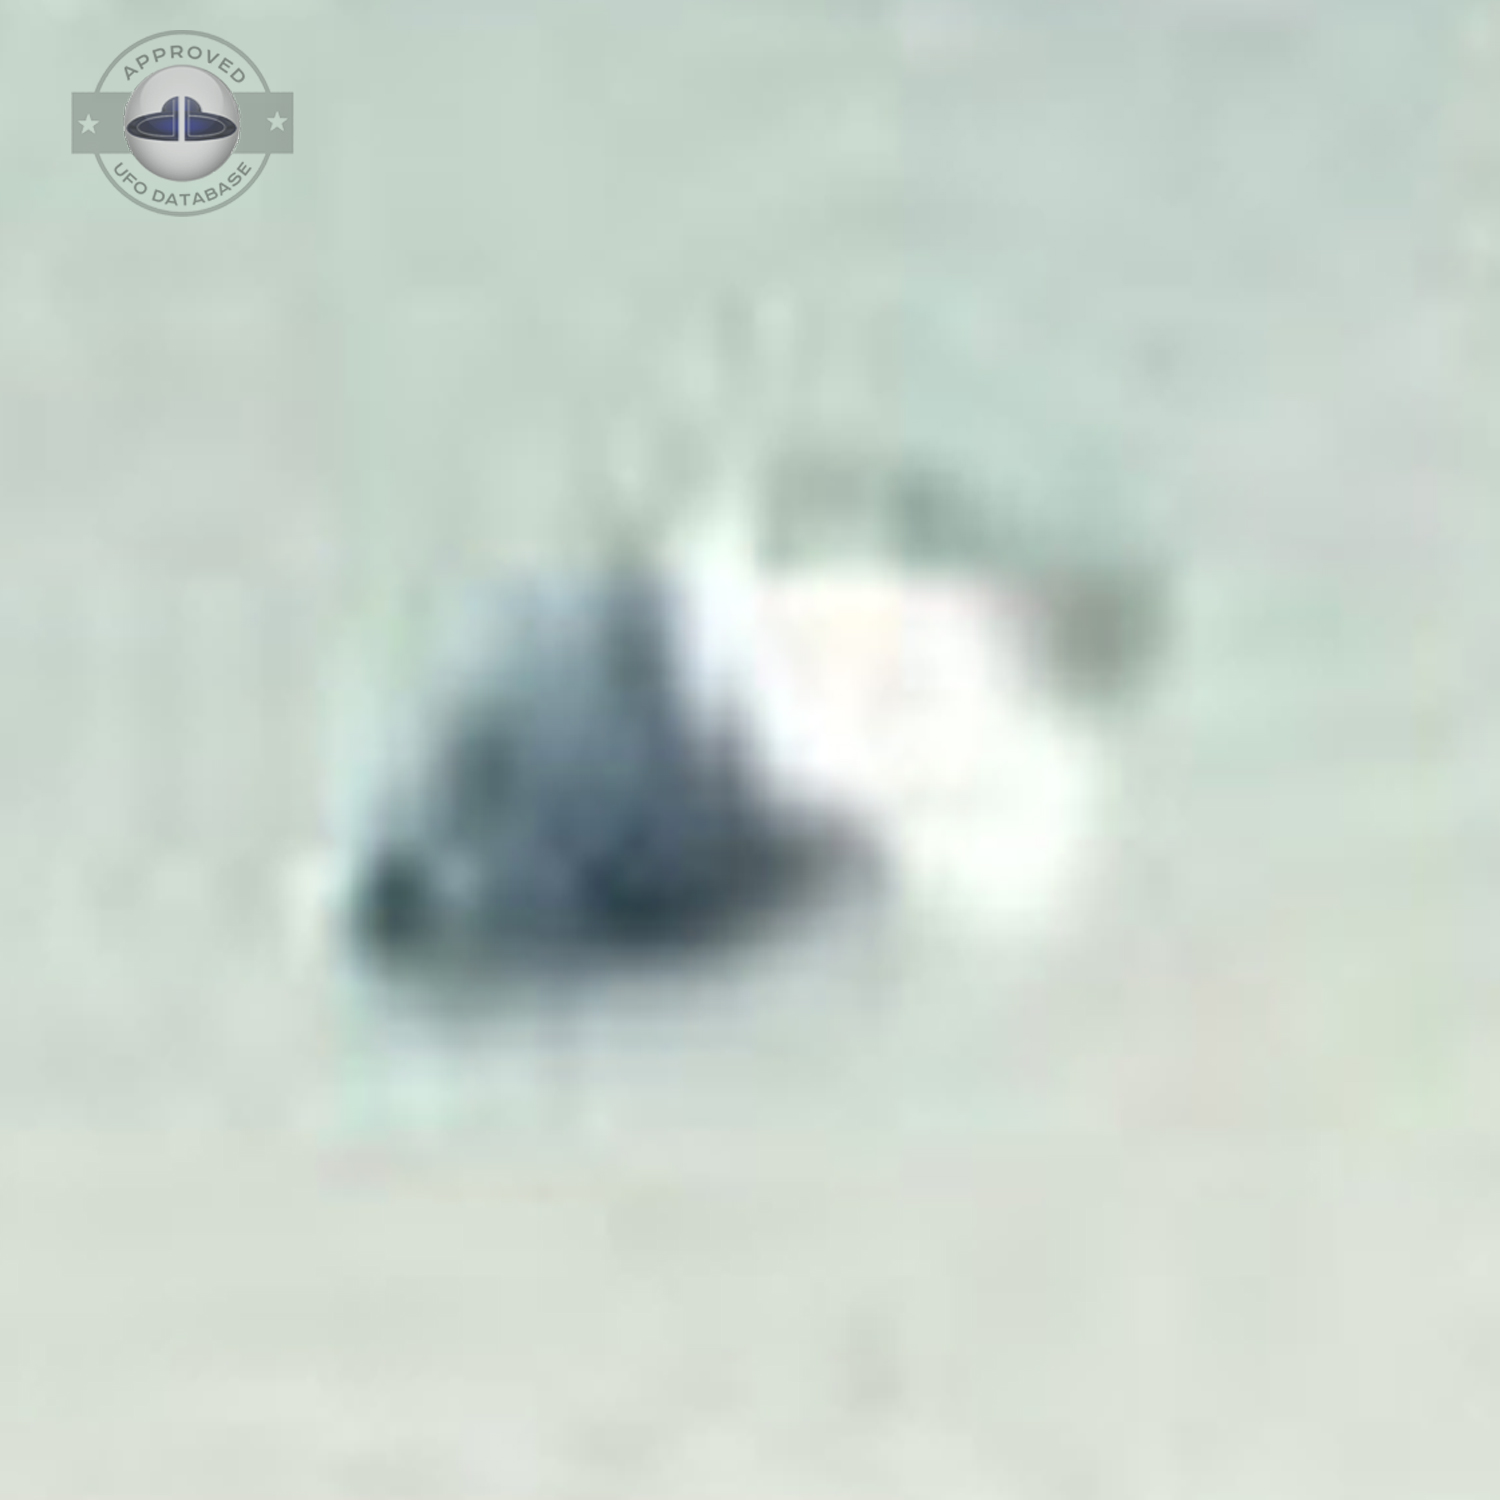 UFO pictures - UFO over mountains in the state of New Mexico UFO Picture #8-4